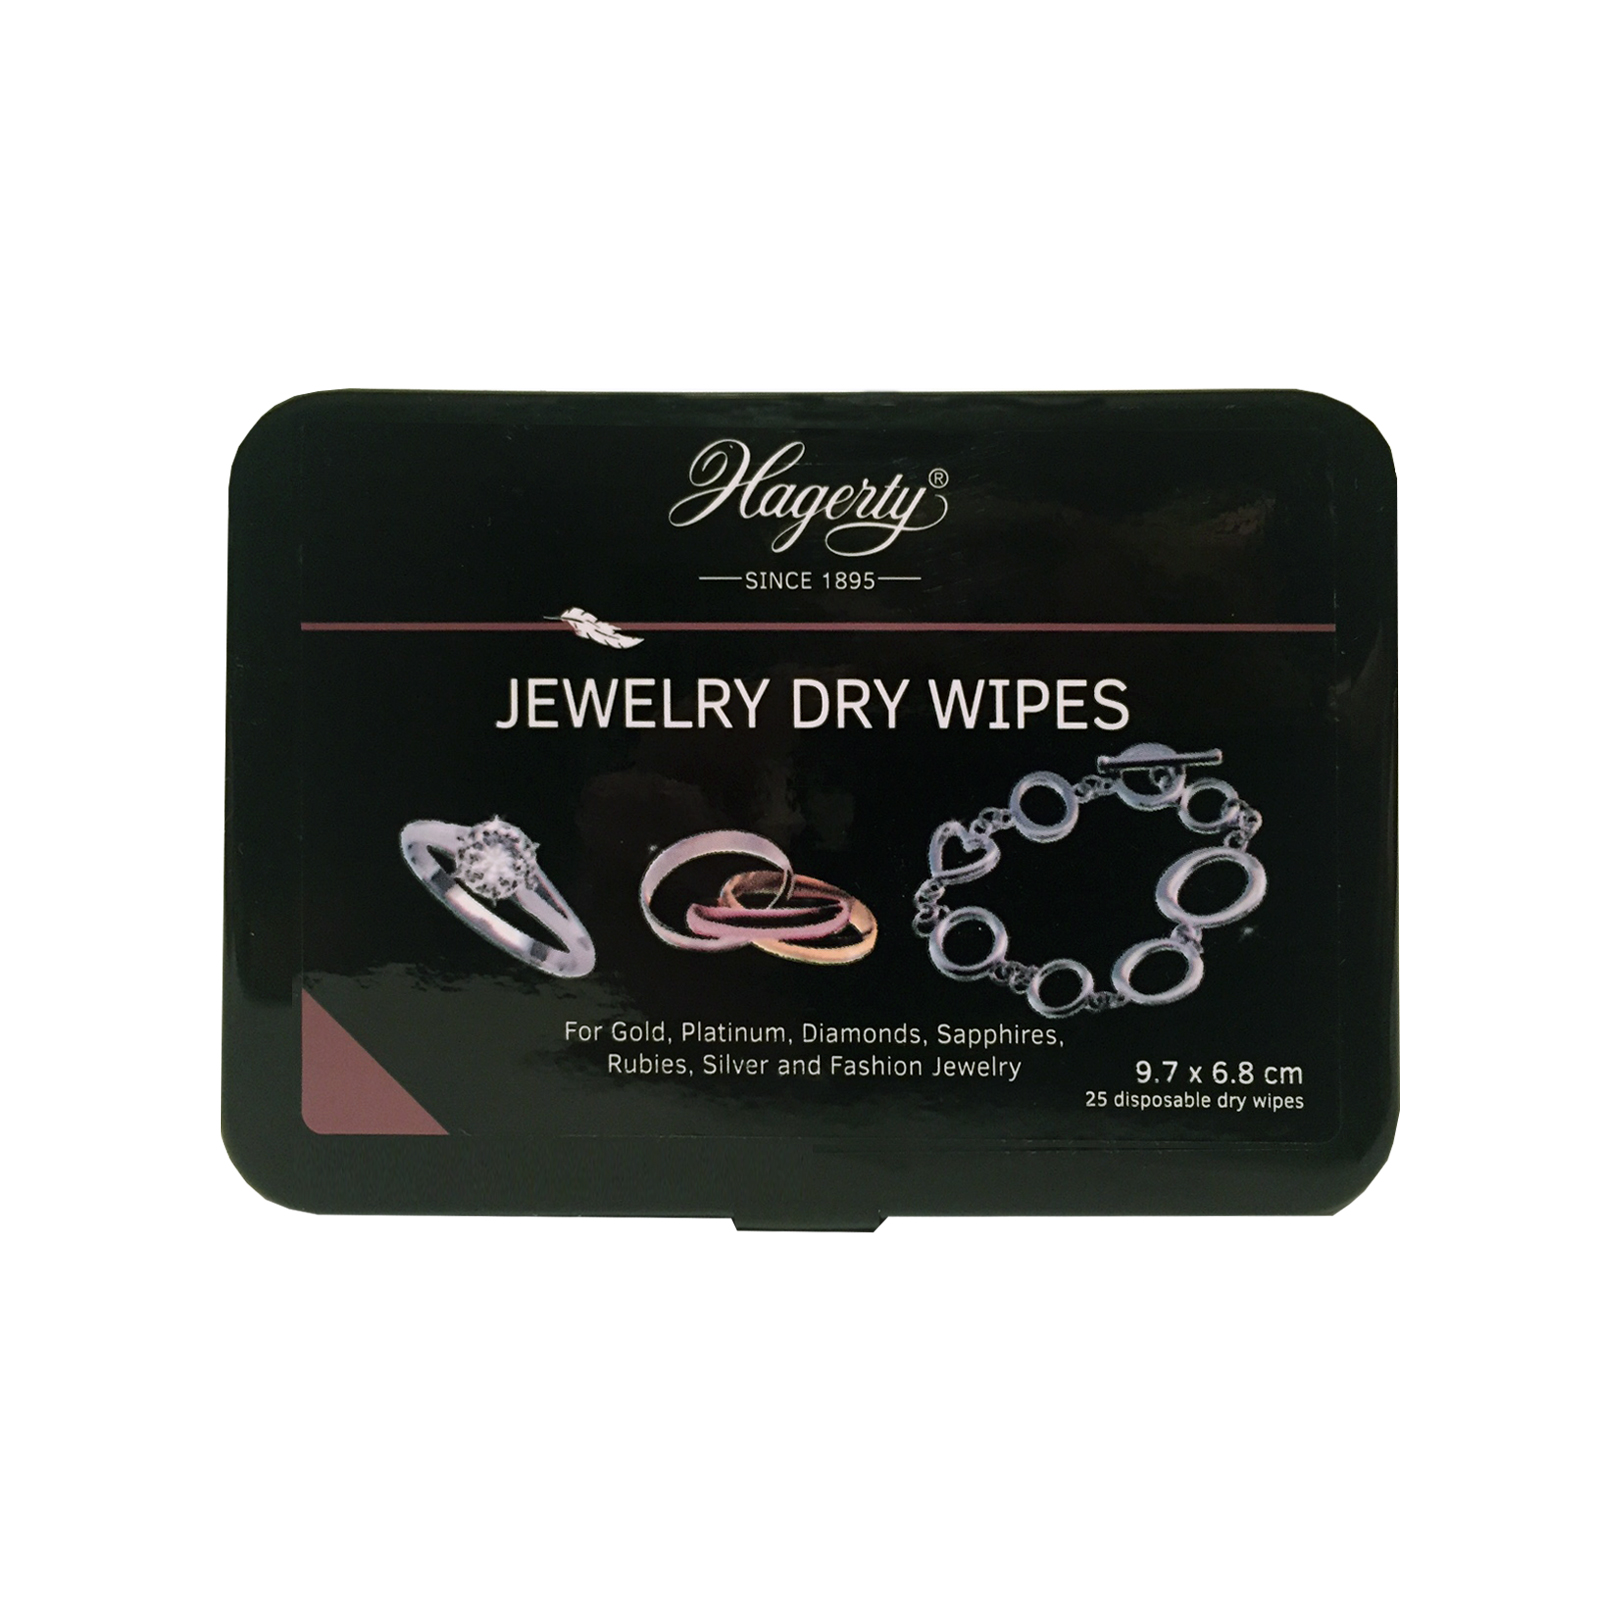 Hagerty Jewel Dry Wipes, 25 disposable wipes, 97 x 68 mm